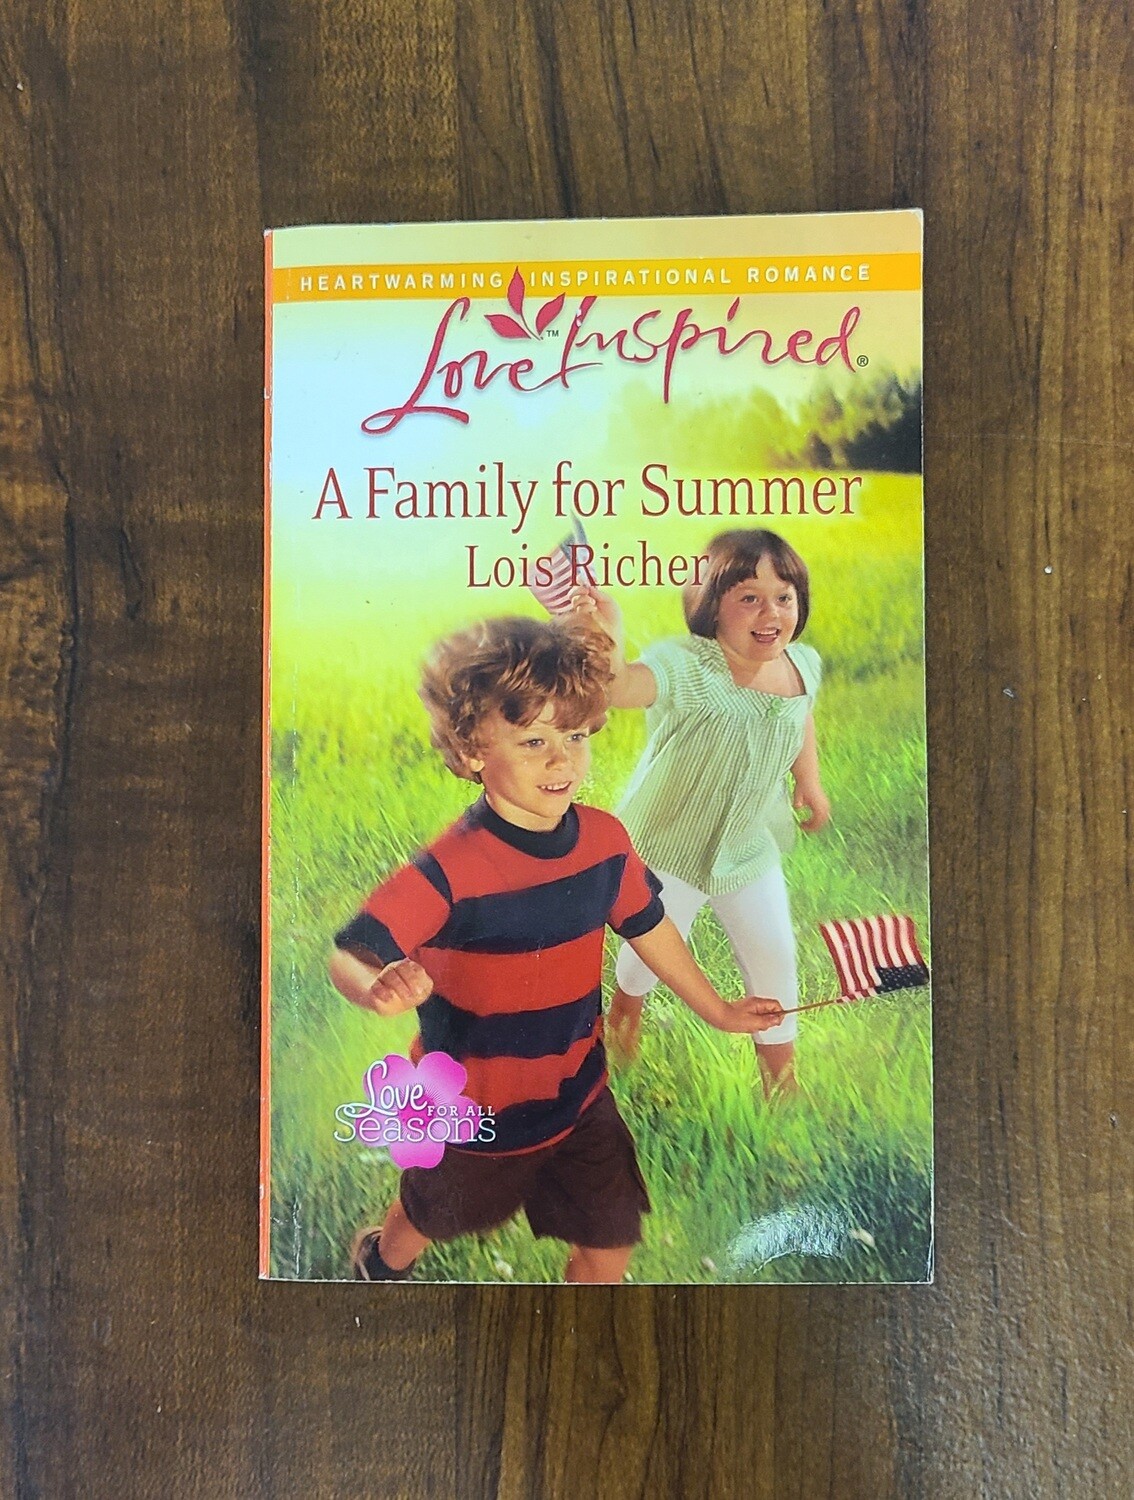 A Family for Summer by Lois Richer